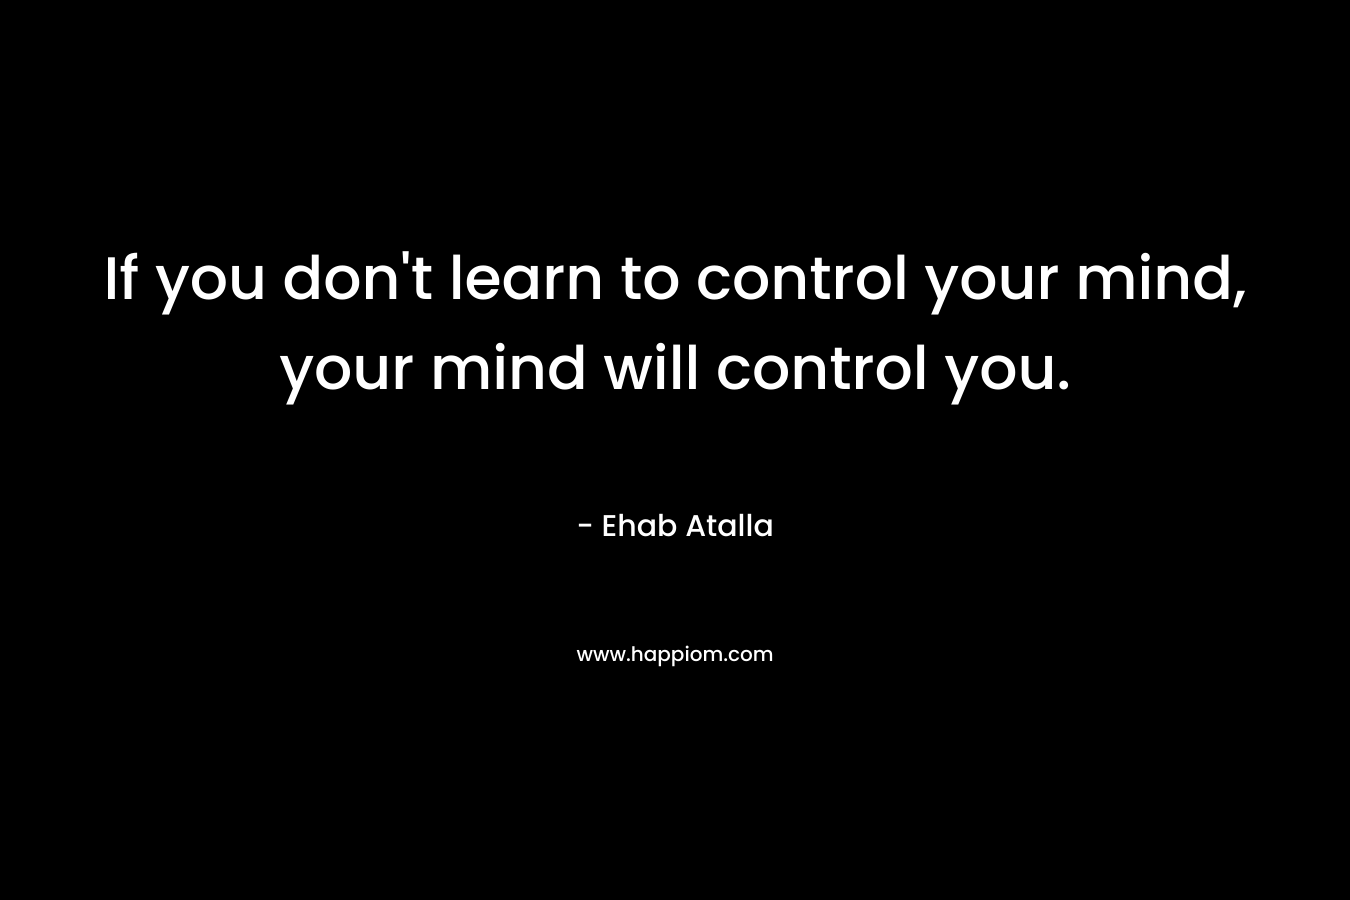 If you don't learn to control your mind, your mind will control you.